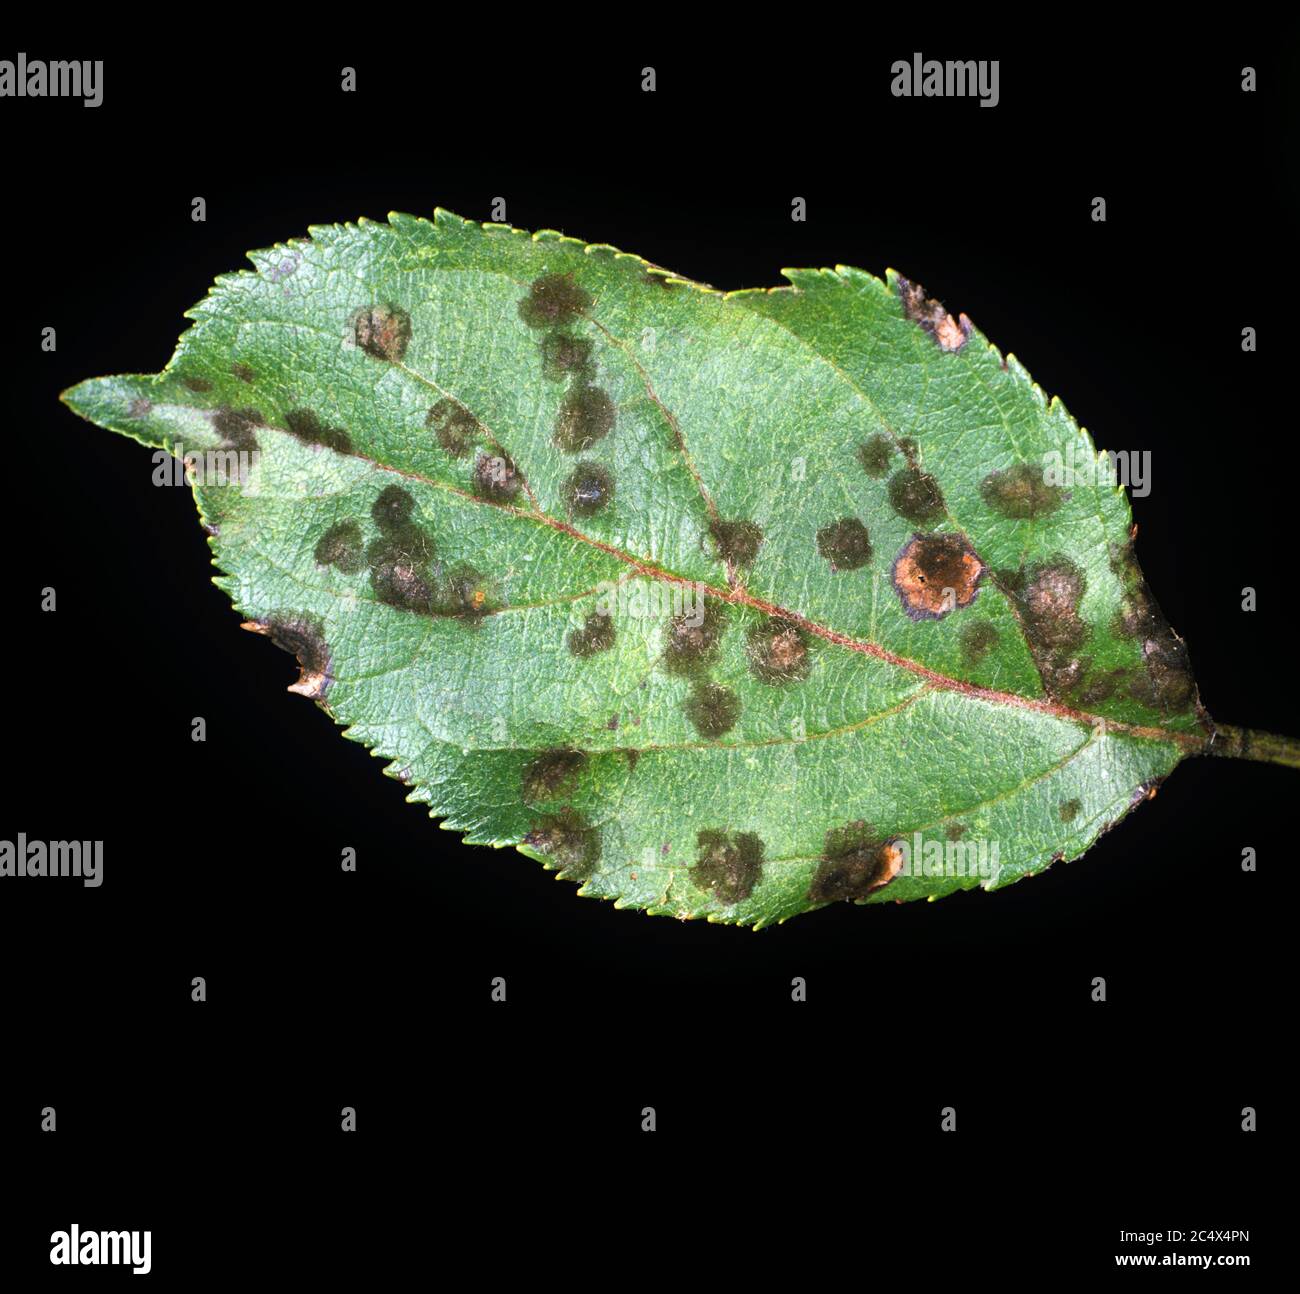 Apple scab (Venturia inaequalis) infection spots germinated from a spore shower on an apple leaf, New York, USA, Stock Photo